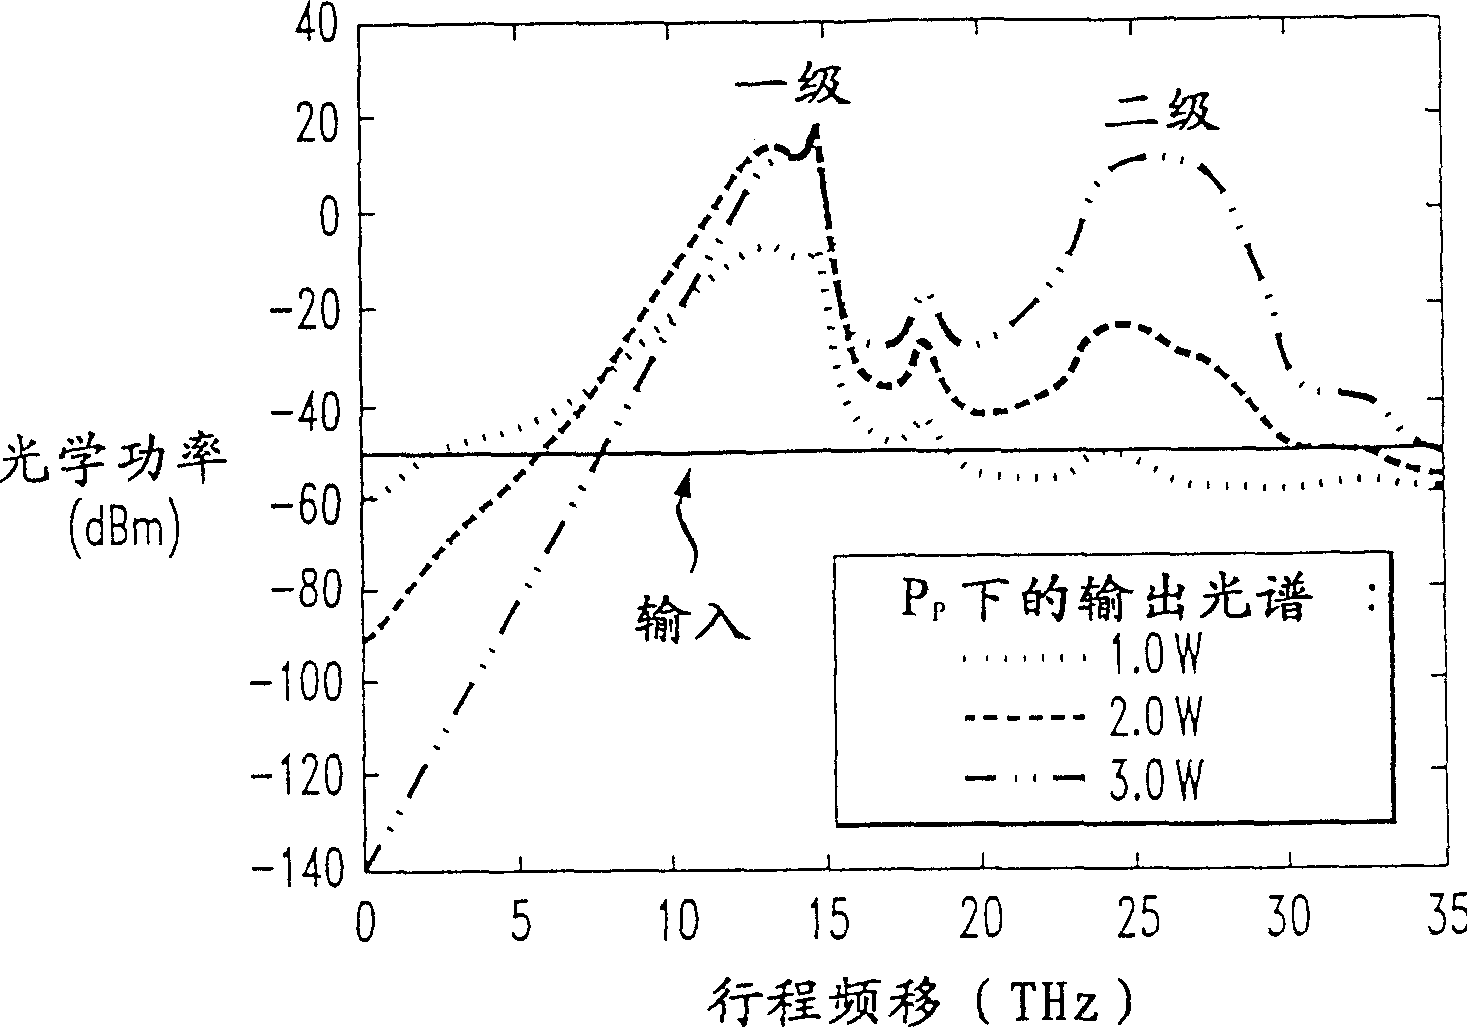 Raman amplifier with raised gain resulted from wave-filtering and optical transmission system